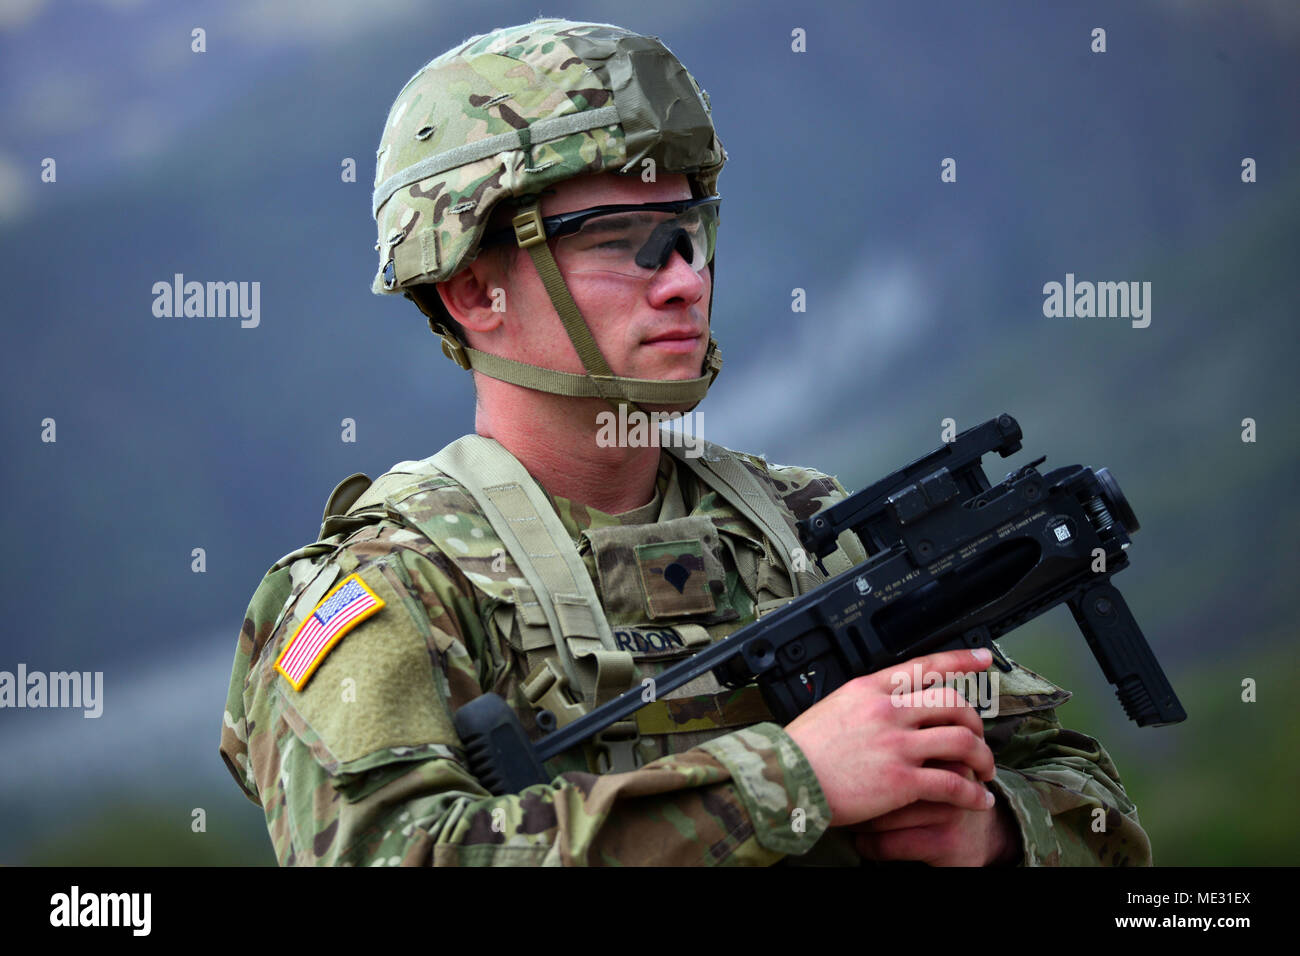 U.S. Army Paratrooper assigned to the Battalion Support Brigade, 173rd Airborne Brigade observe area with his M320 grenade launcher module during weapons qualification at Cao Malnisio Range, Pordenone, Italy, April 17, 2018. The 173rd Airborne Brigade is the U.S. Army Contingency Response Force in Europe, capable of projecting ready forces anywhere in the U.S. European, Africa or Central Commands' areas of responsibility. (U.S. Army Photos by Paolo Bovo) Stock Photo